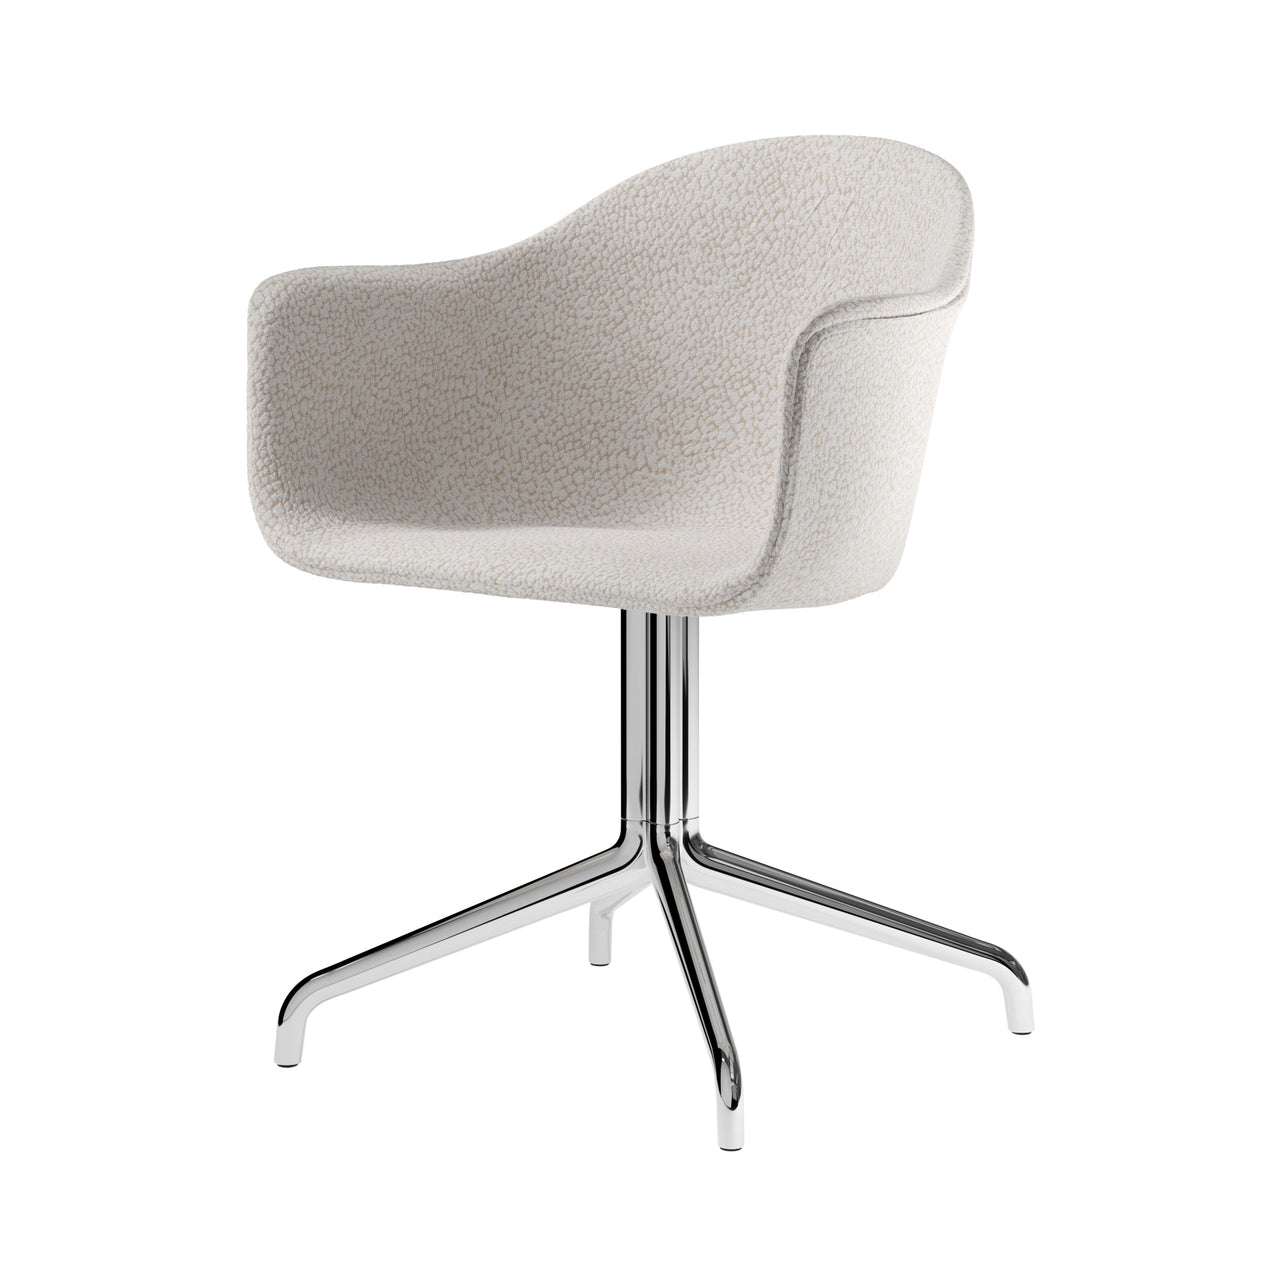 Harbour Dining Chair Star Base: Upholstered + Polished Aluminum